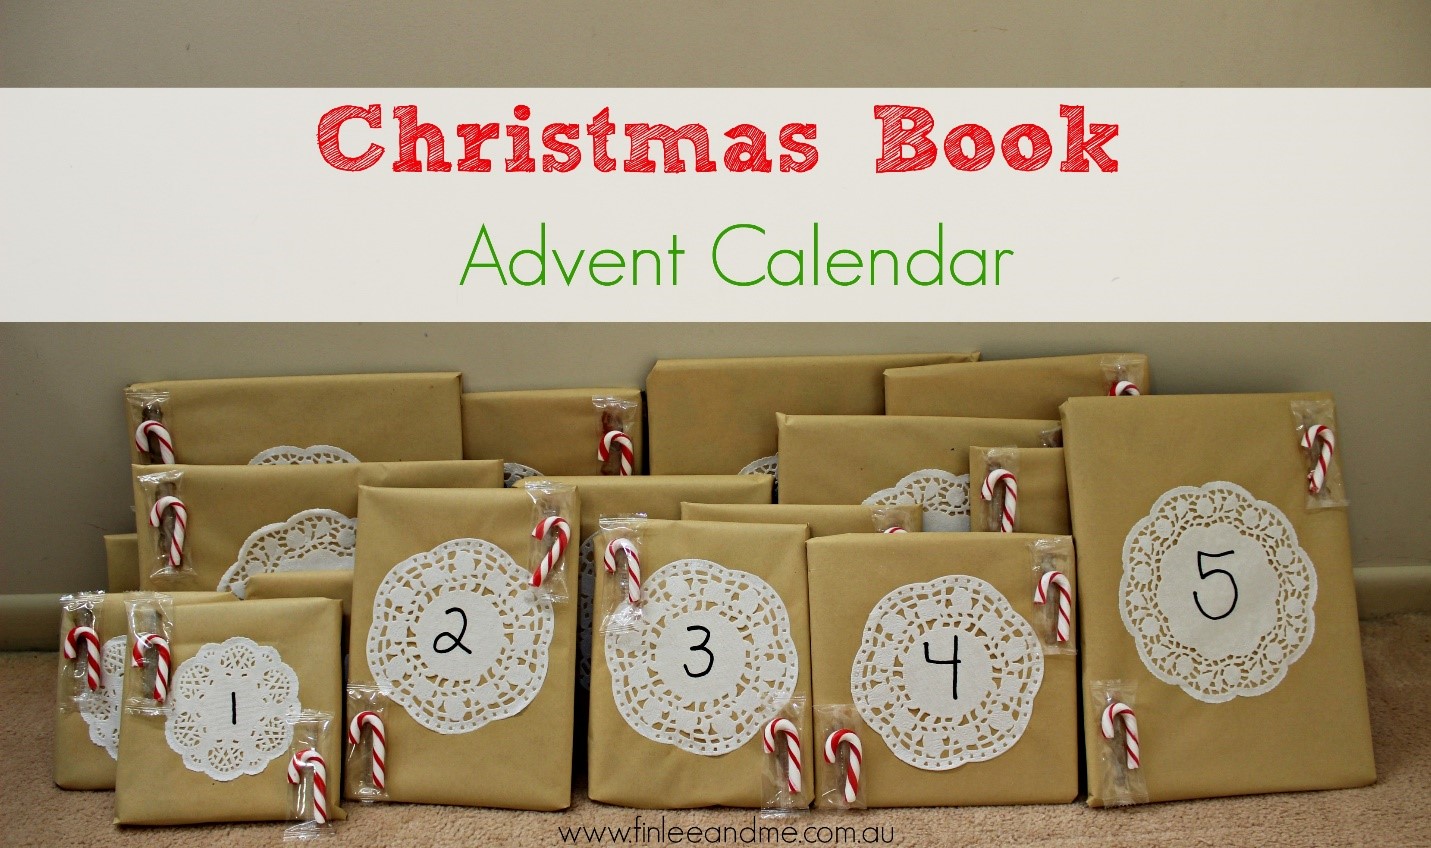 Books wrapped in brown paper with a number for each day of Advent